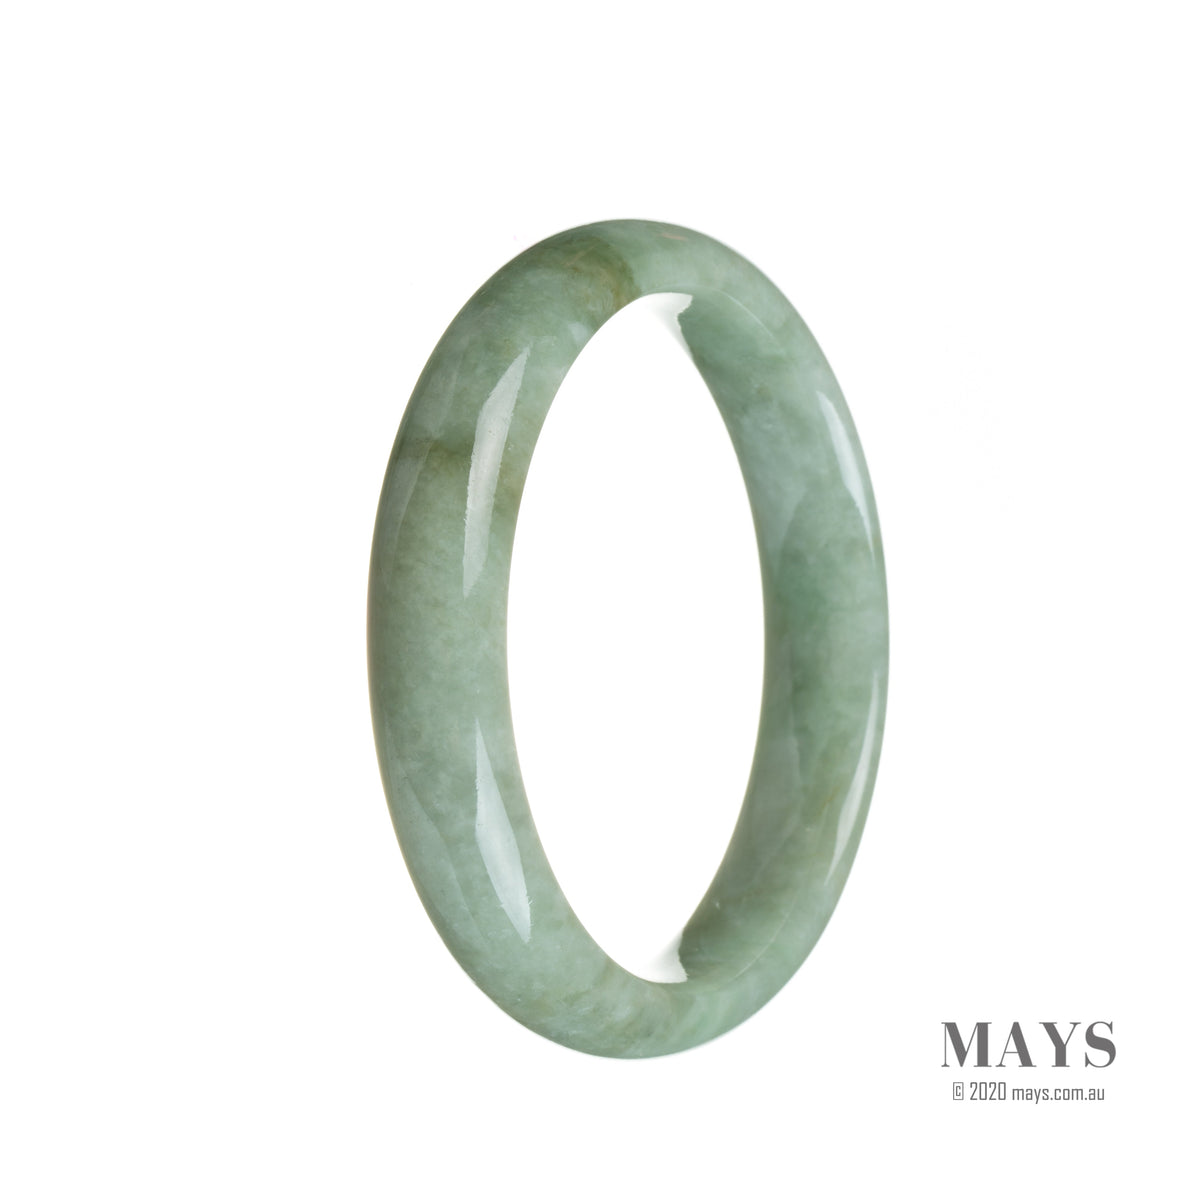 A light green, semi-round jadeite bangle with authentic Grade A quality, measuring 56mm in diameter. Perfect for adding a touch of elegance to any outfit.